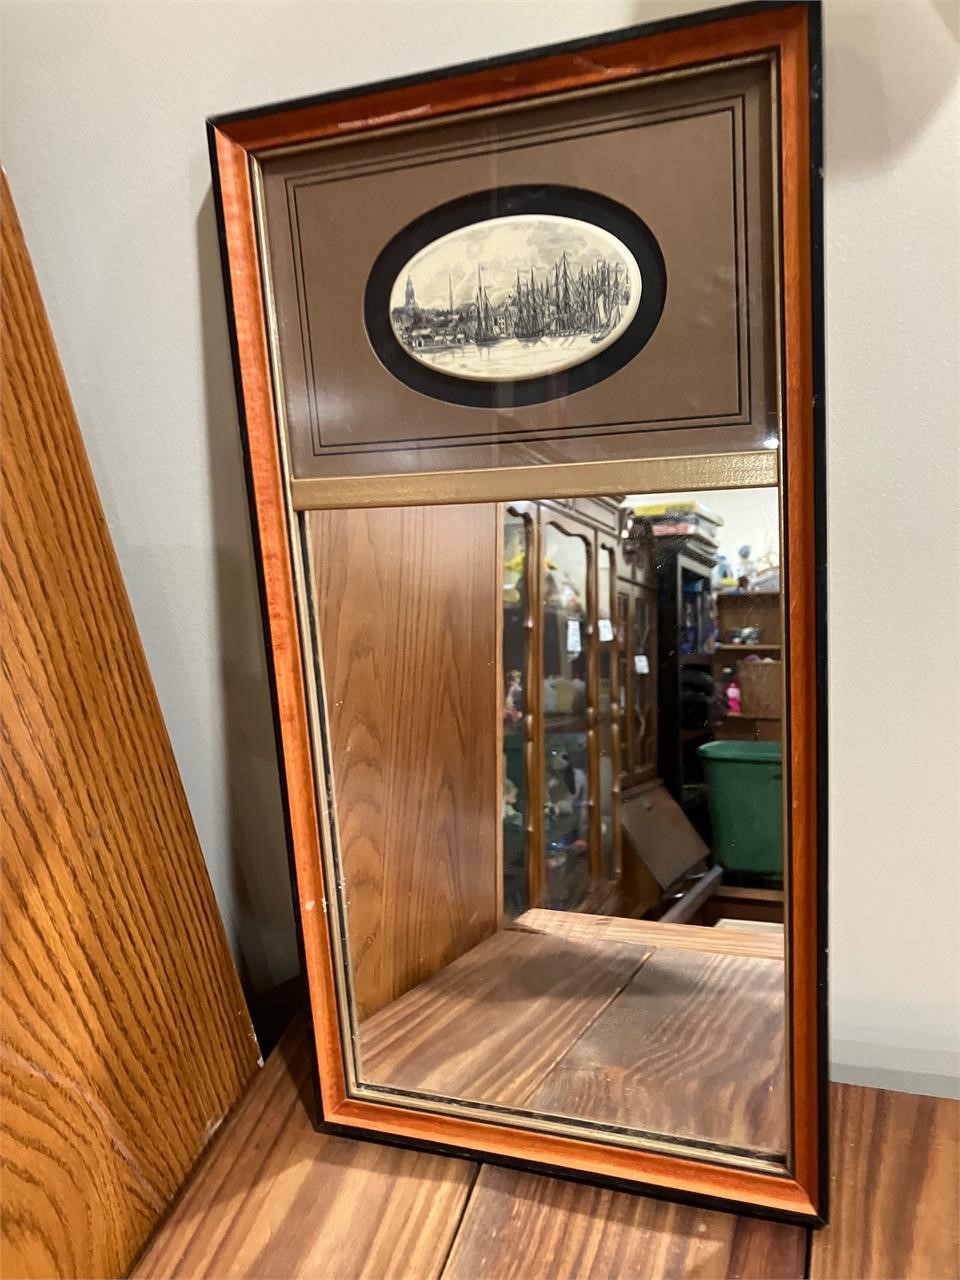 Small hanging mirror with ships